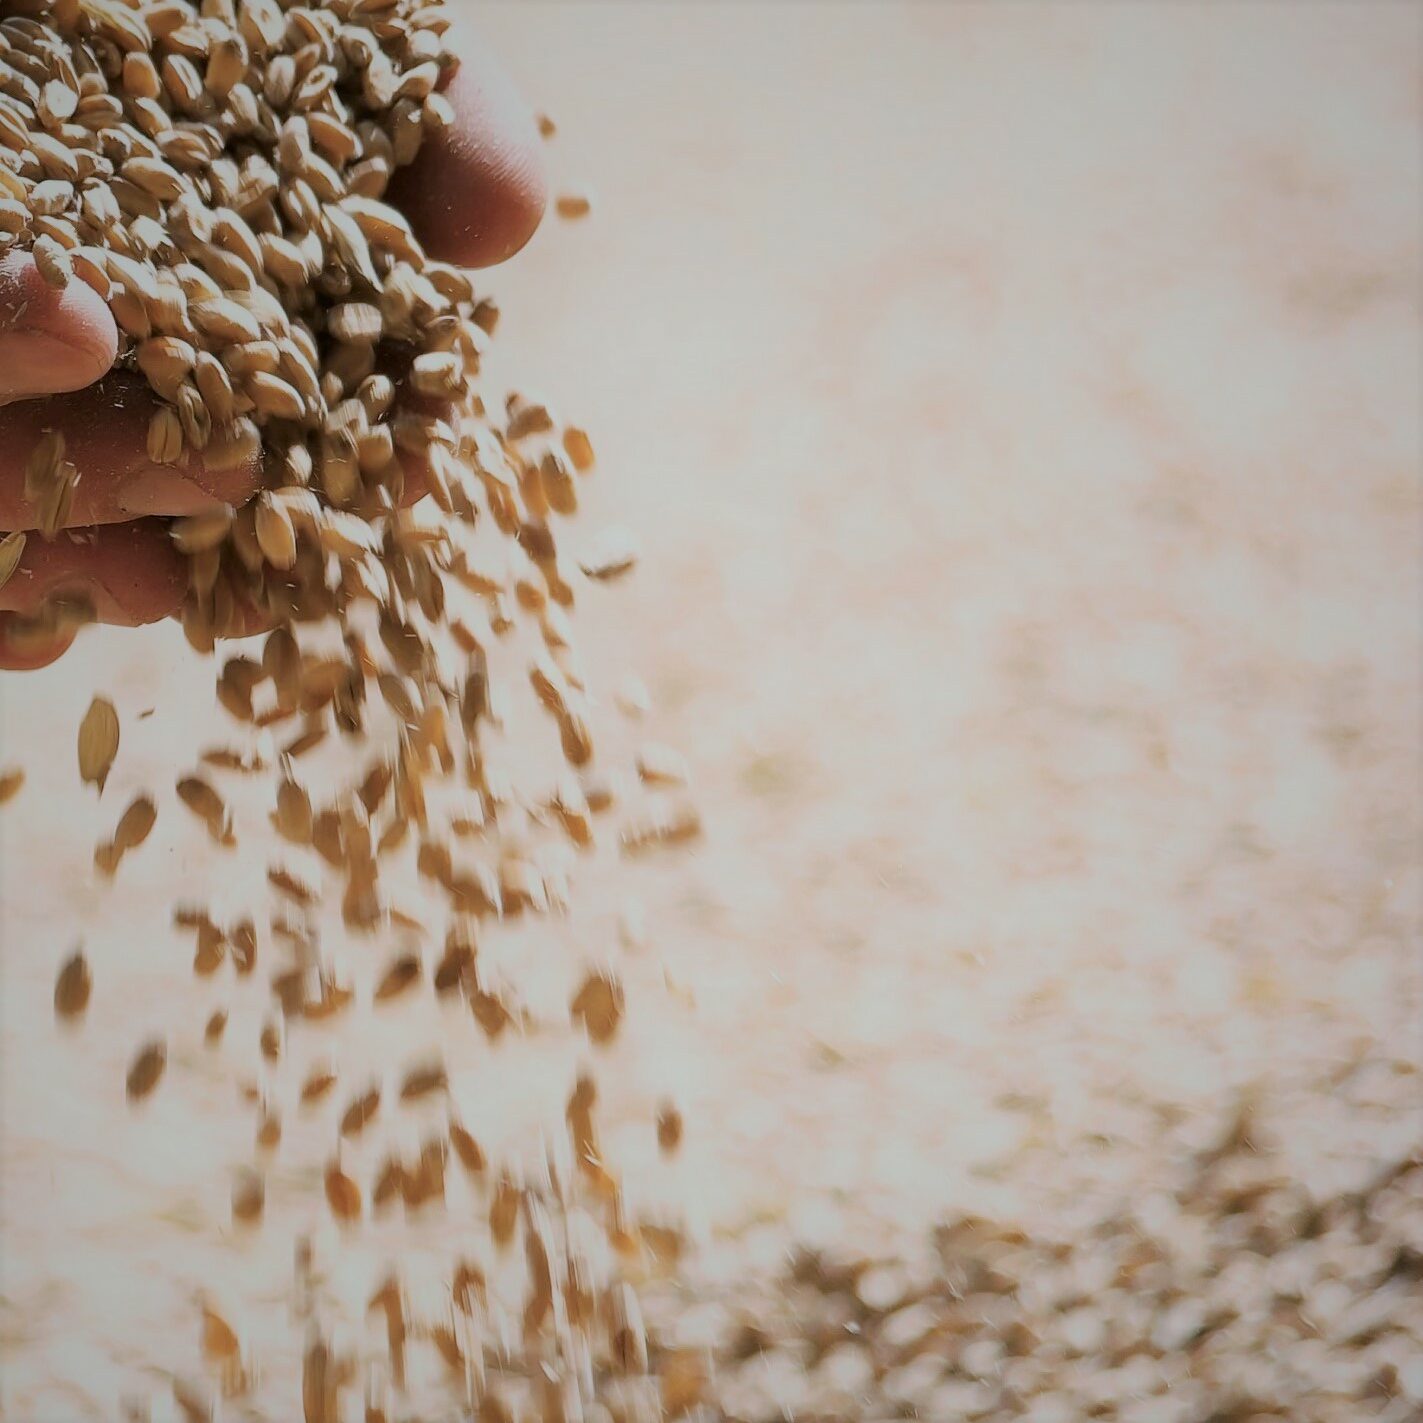 Wheat,Grains,In,Hands,At,Mill,Storage.,Close,Up.,Good